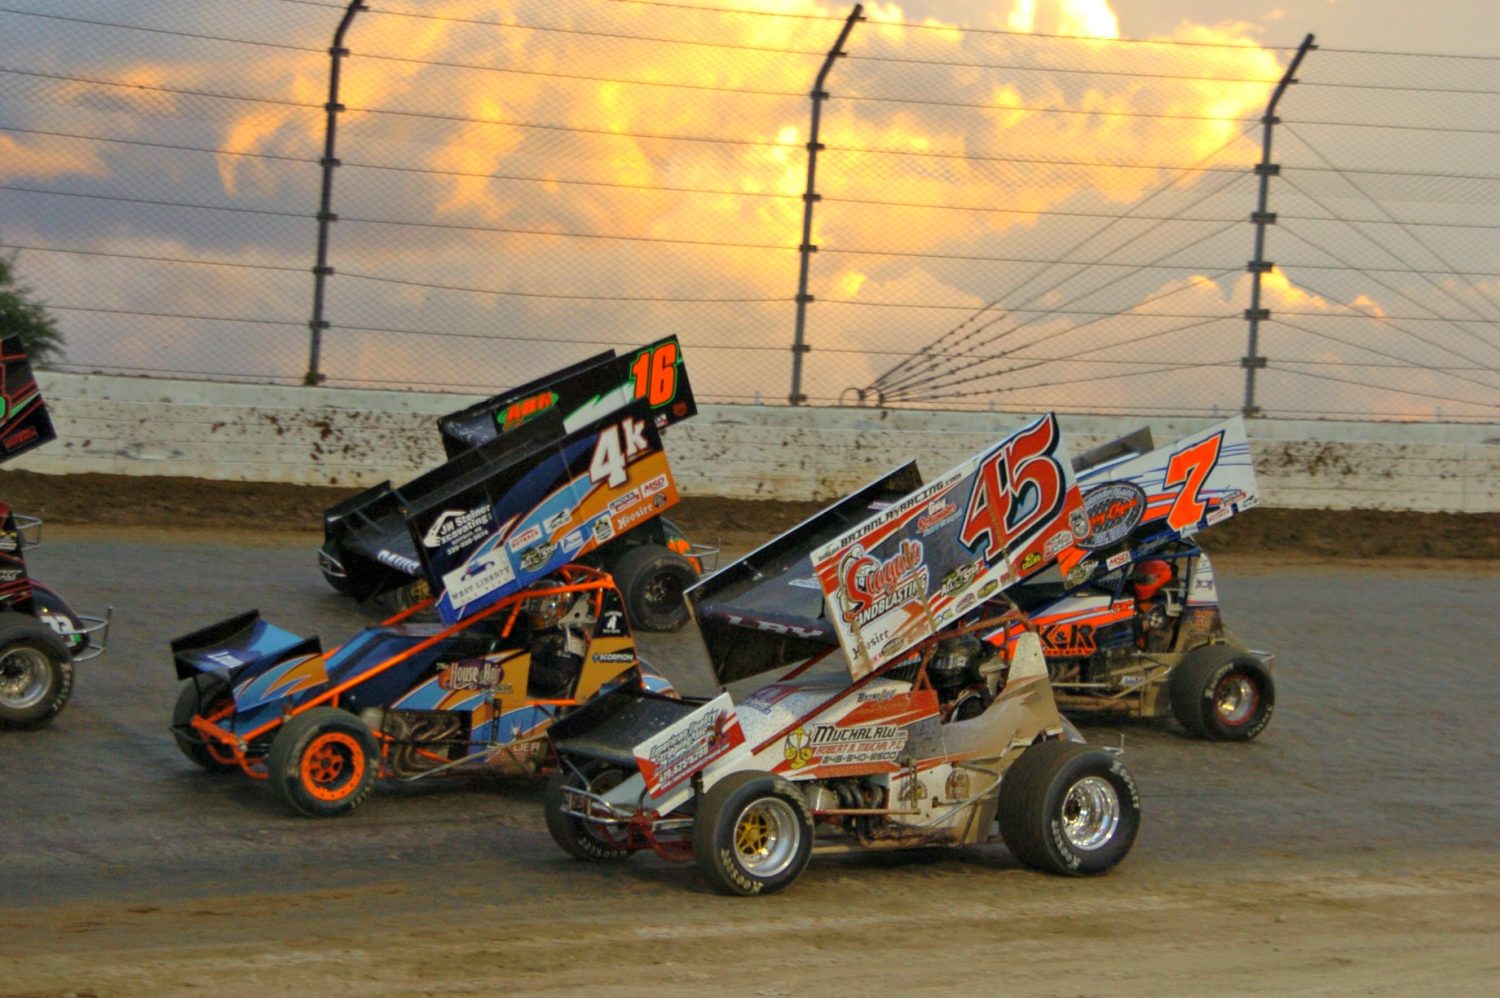 Mansfield to Host Sprint  Car World Championship in 2018